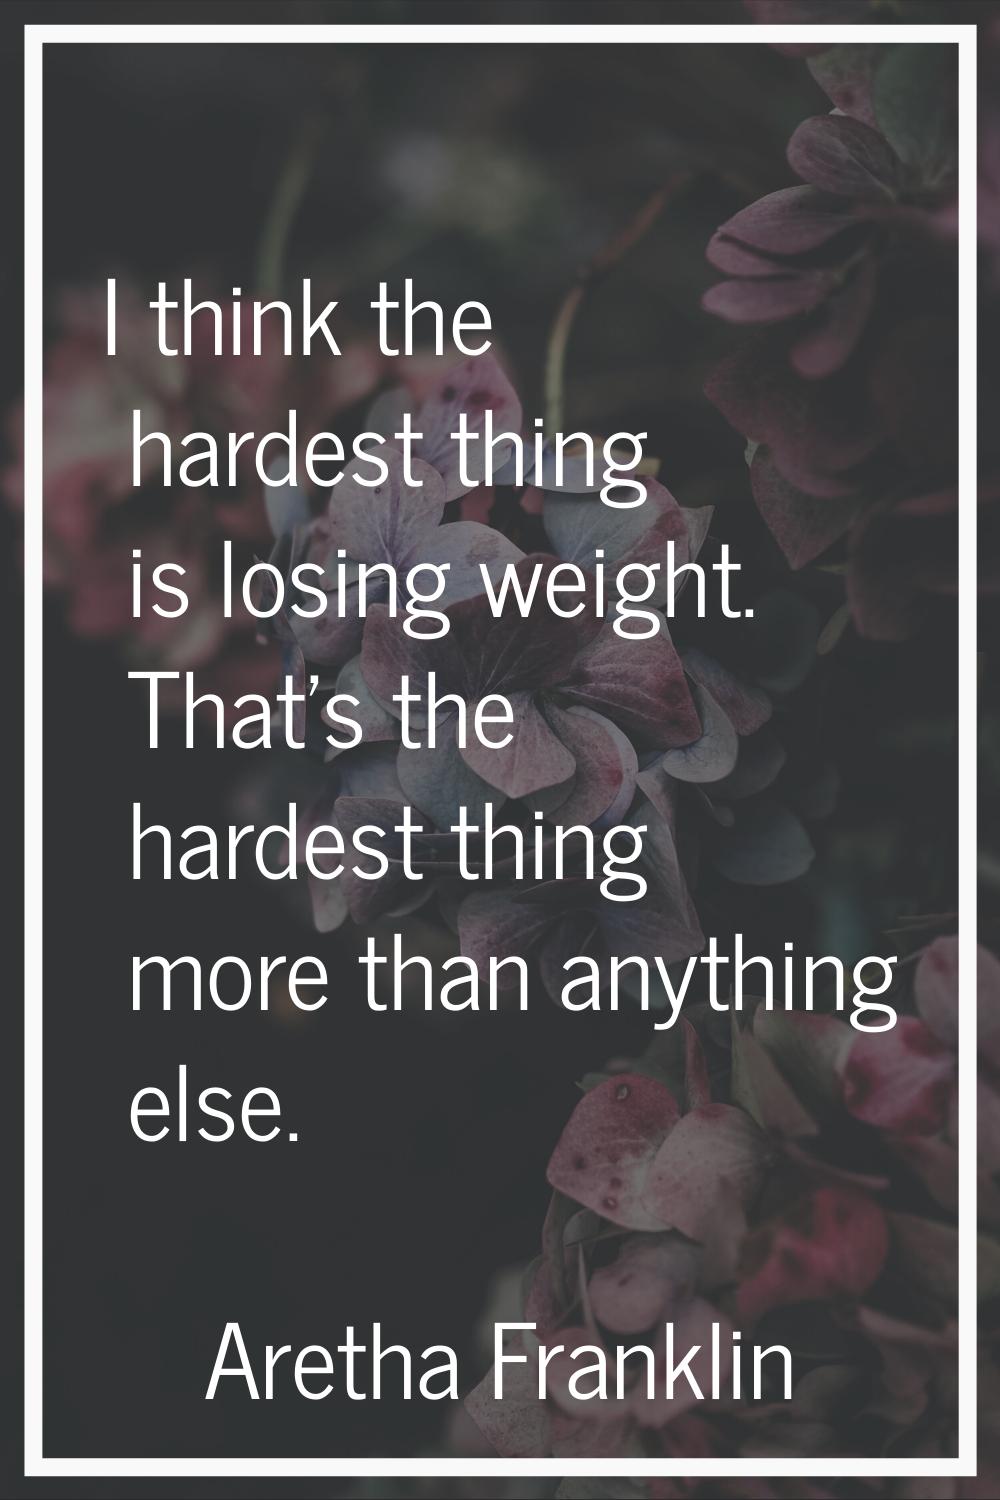 I think the hardest thing is losing weight. That's the hardest thing more than anything else.